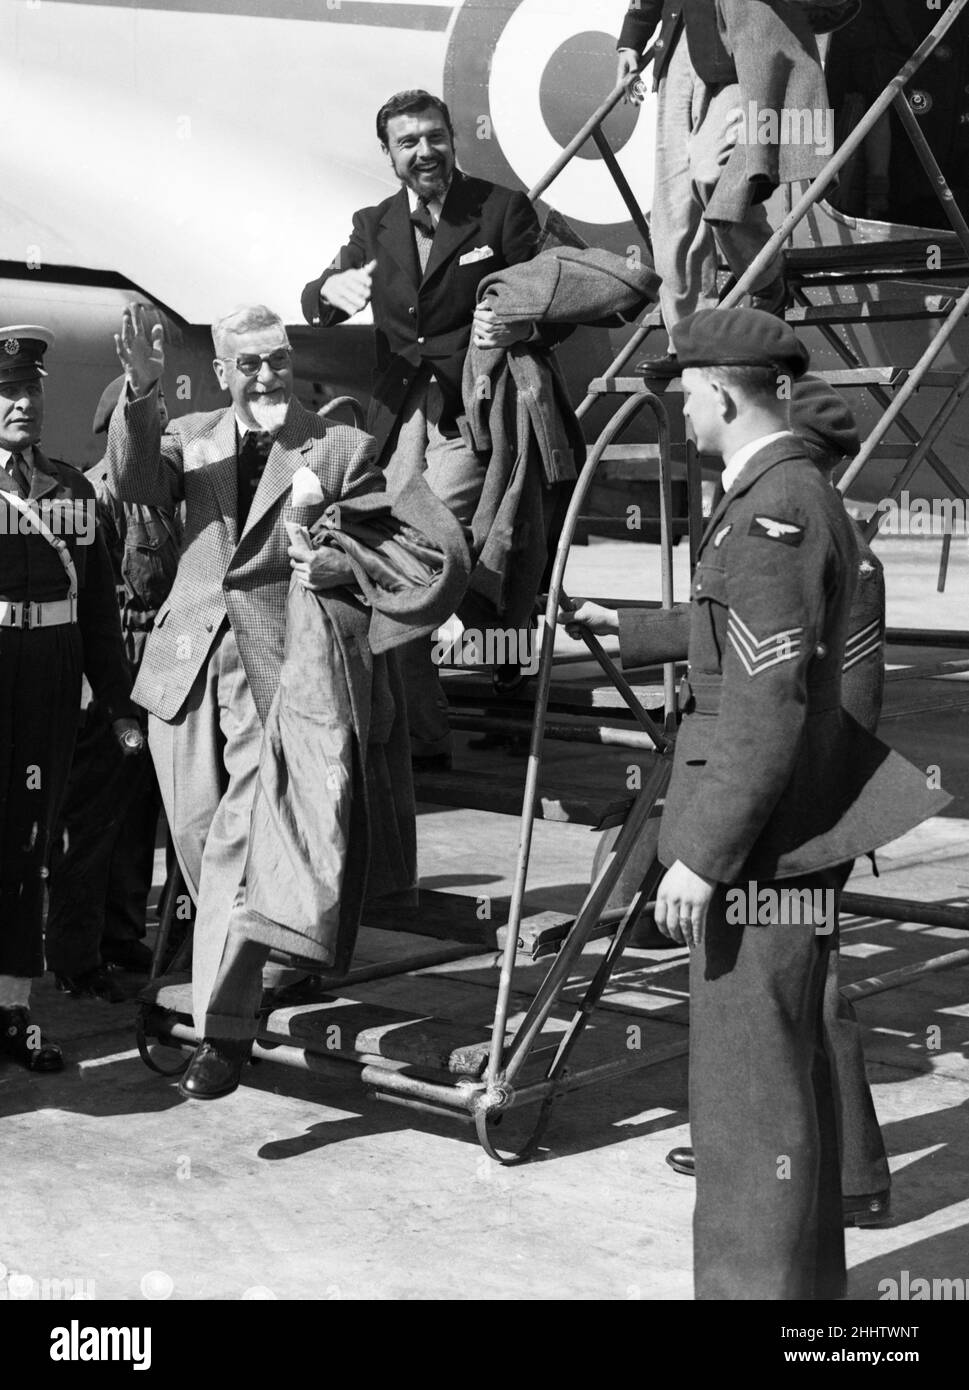 George Blake seen here at the top of the stairs disembarking  from an RAF transport plane in Abingdon, Oxfordshire, England following three years of internment in North Korea. Blake had been sent to South Korea as a dipolmat but within months of his arrival in Seoul, the city was captured by the advancing North Korean Army and Blake was taken prisoner. After capture by the North Koreans, and after reading the works of Karl Marx during his three-year detention, he converted to Marxism. Following his release he was sent by MI6 to work in Berlin, where he made contact with the KGB and betrayed th Stock Photo